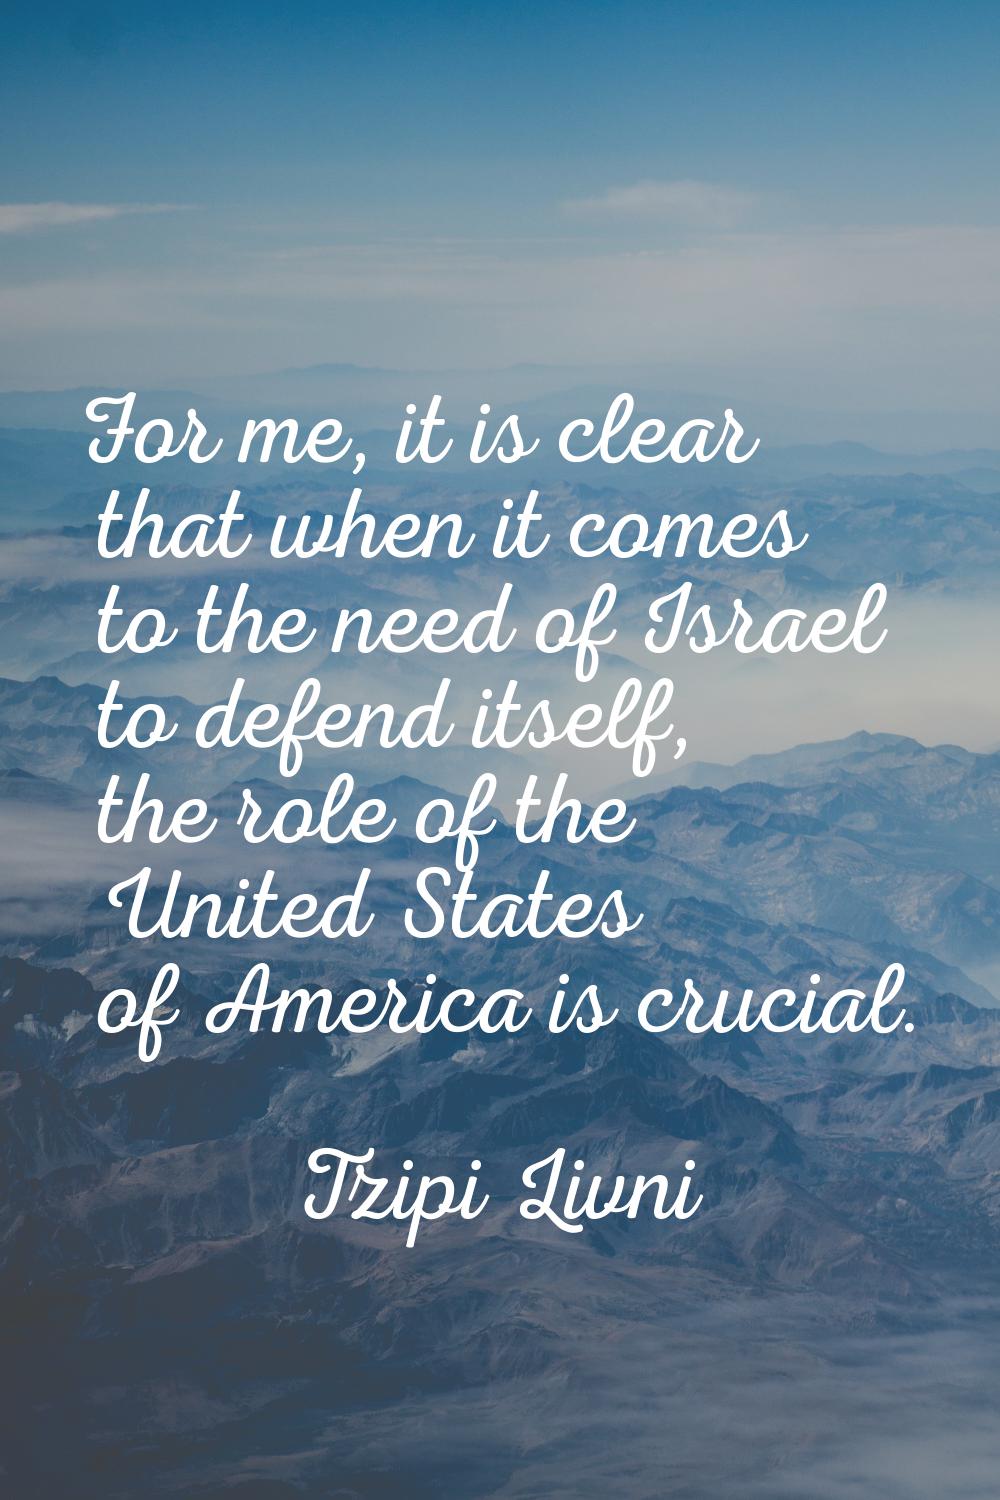 For me, it is clear that when it comes to the need of Israel to defend itself, the role of the Unit